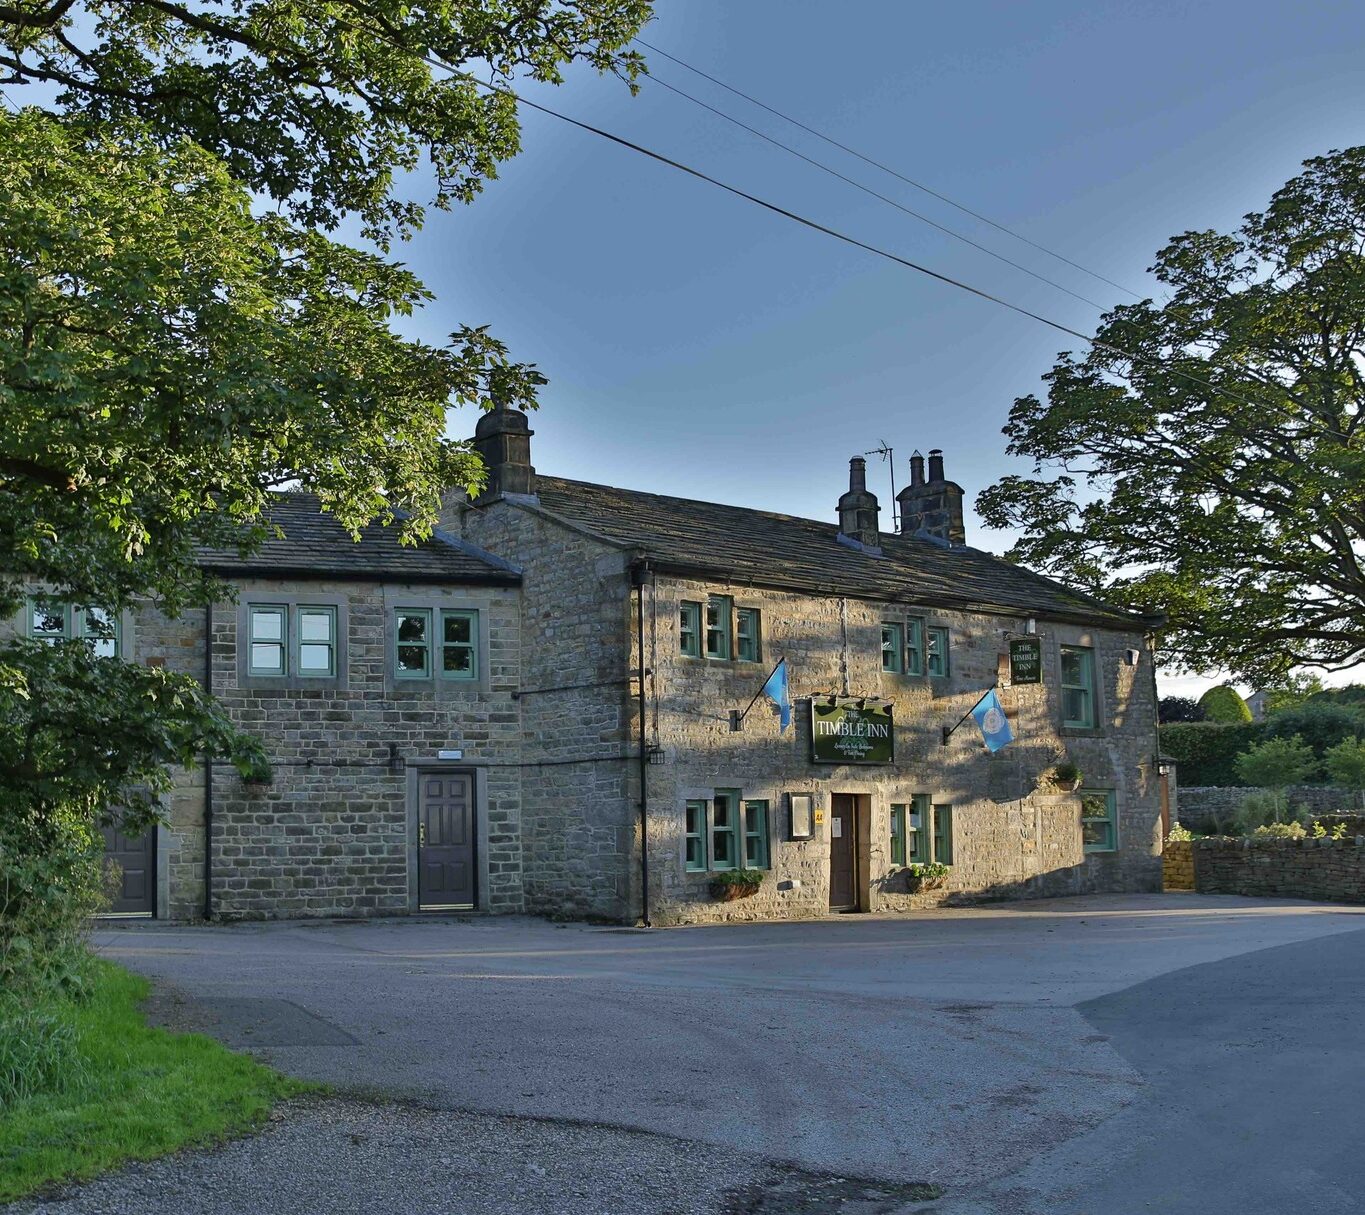 Harrogate district inn named in top 10 UK country pubs for a winter weekend 